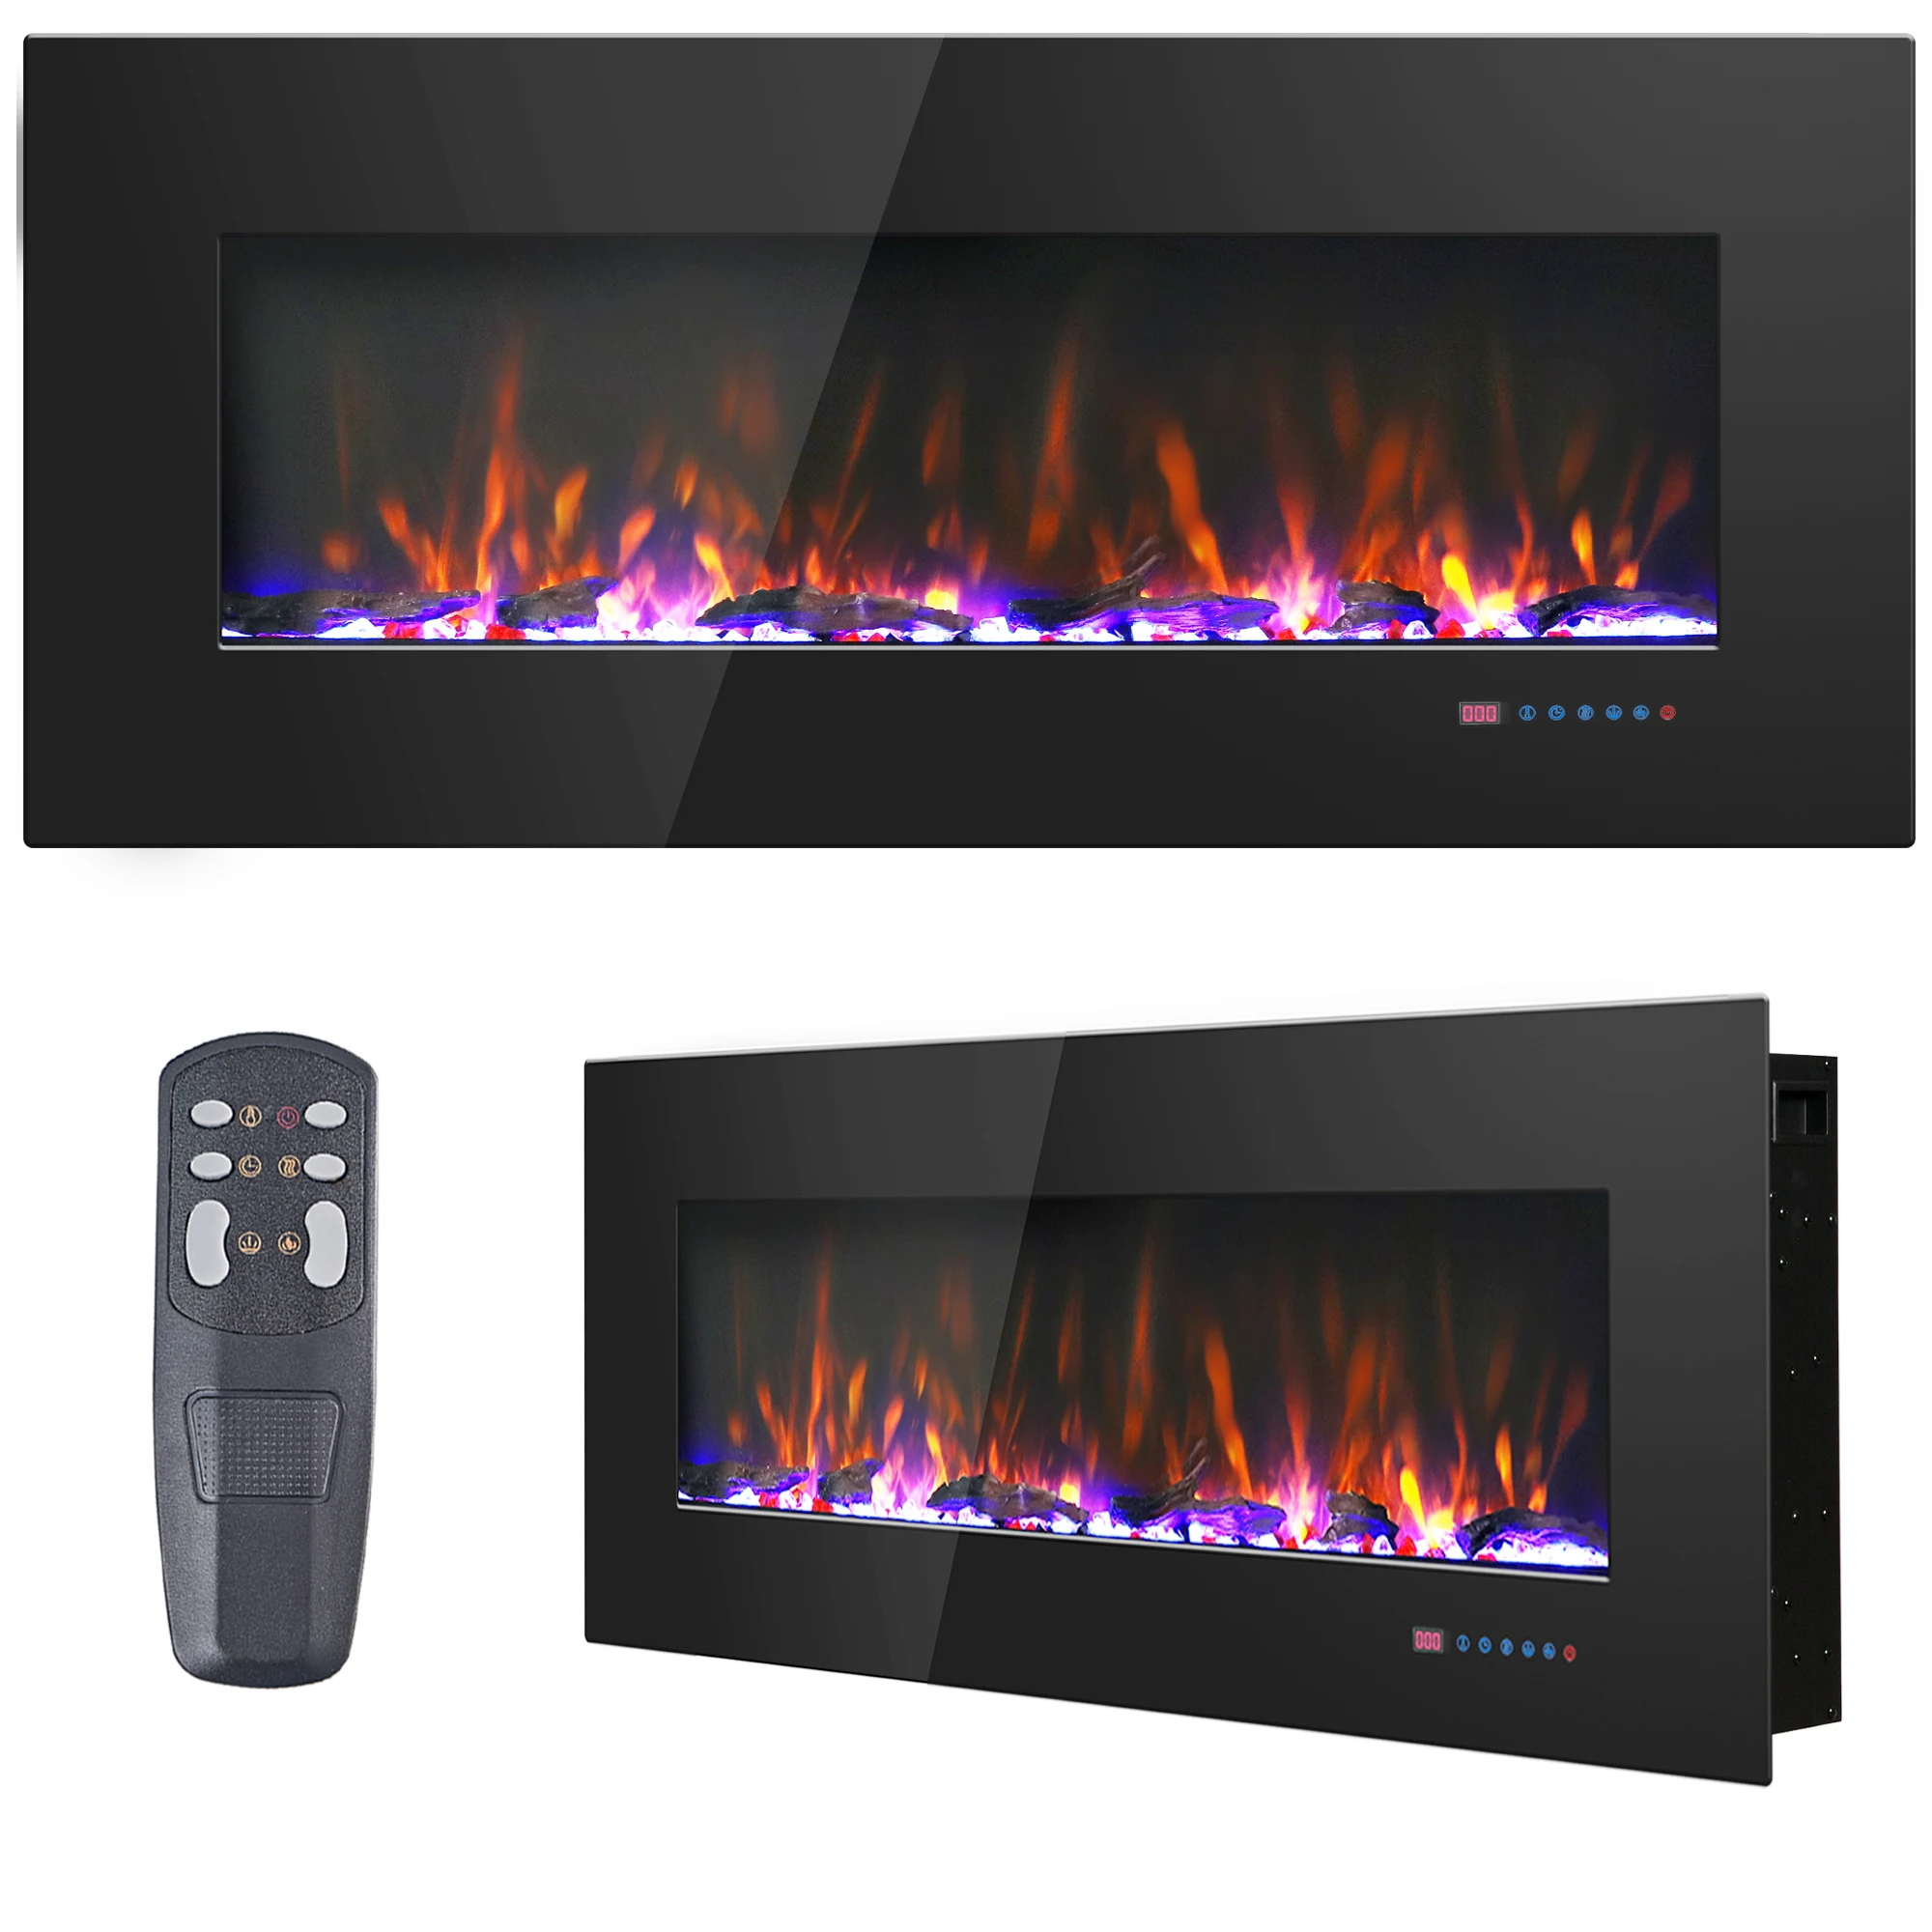 Luxstar 42 Inch Wall Mounted Not For Recessed Electric Fireplace Heaters LED Real Flame Indoor Fireplace